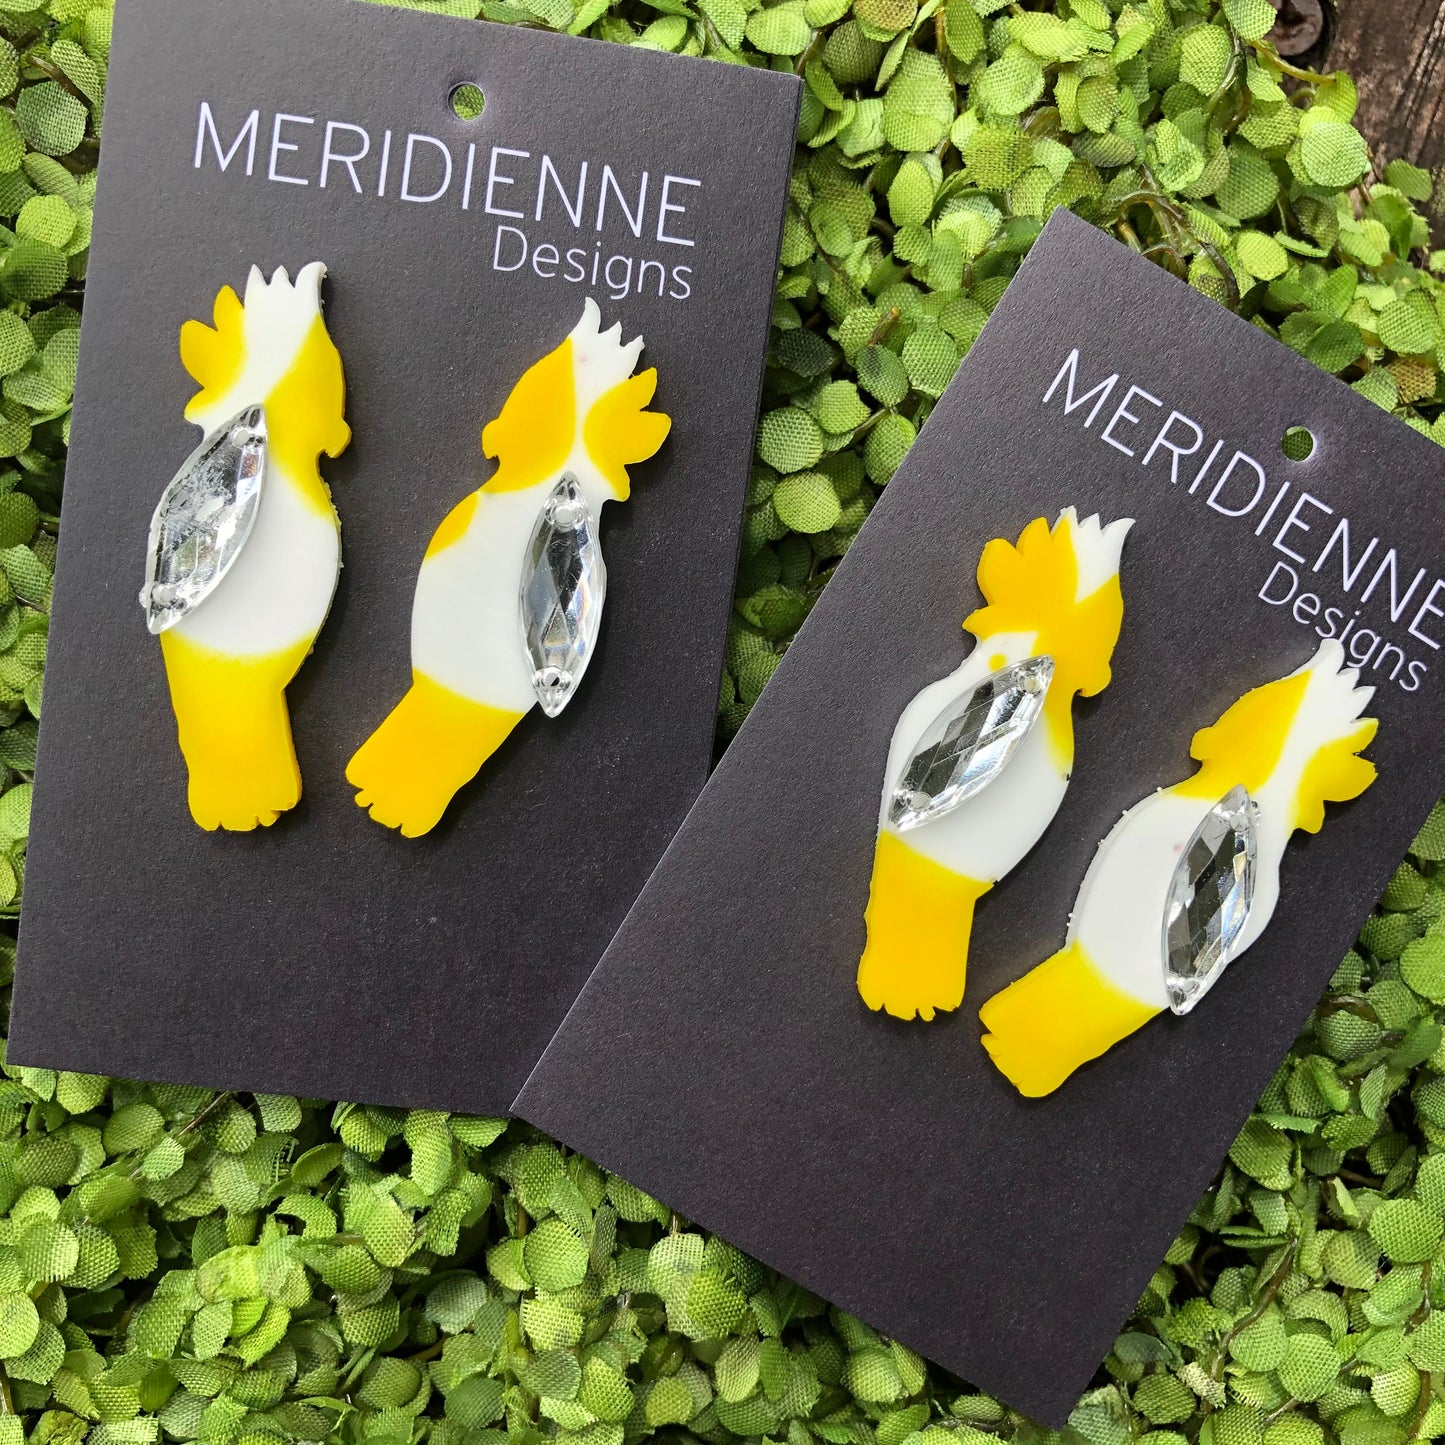 Pimped up - Cockatoo Bird Resin Earrings